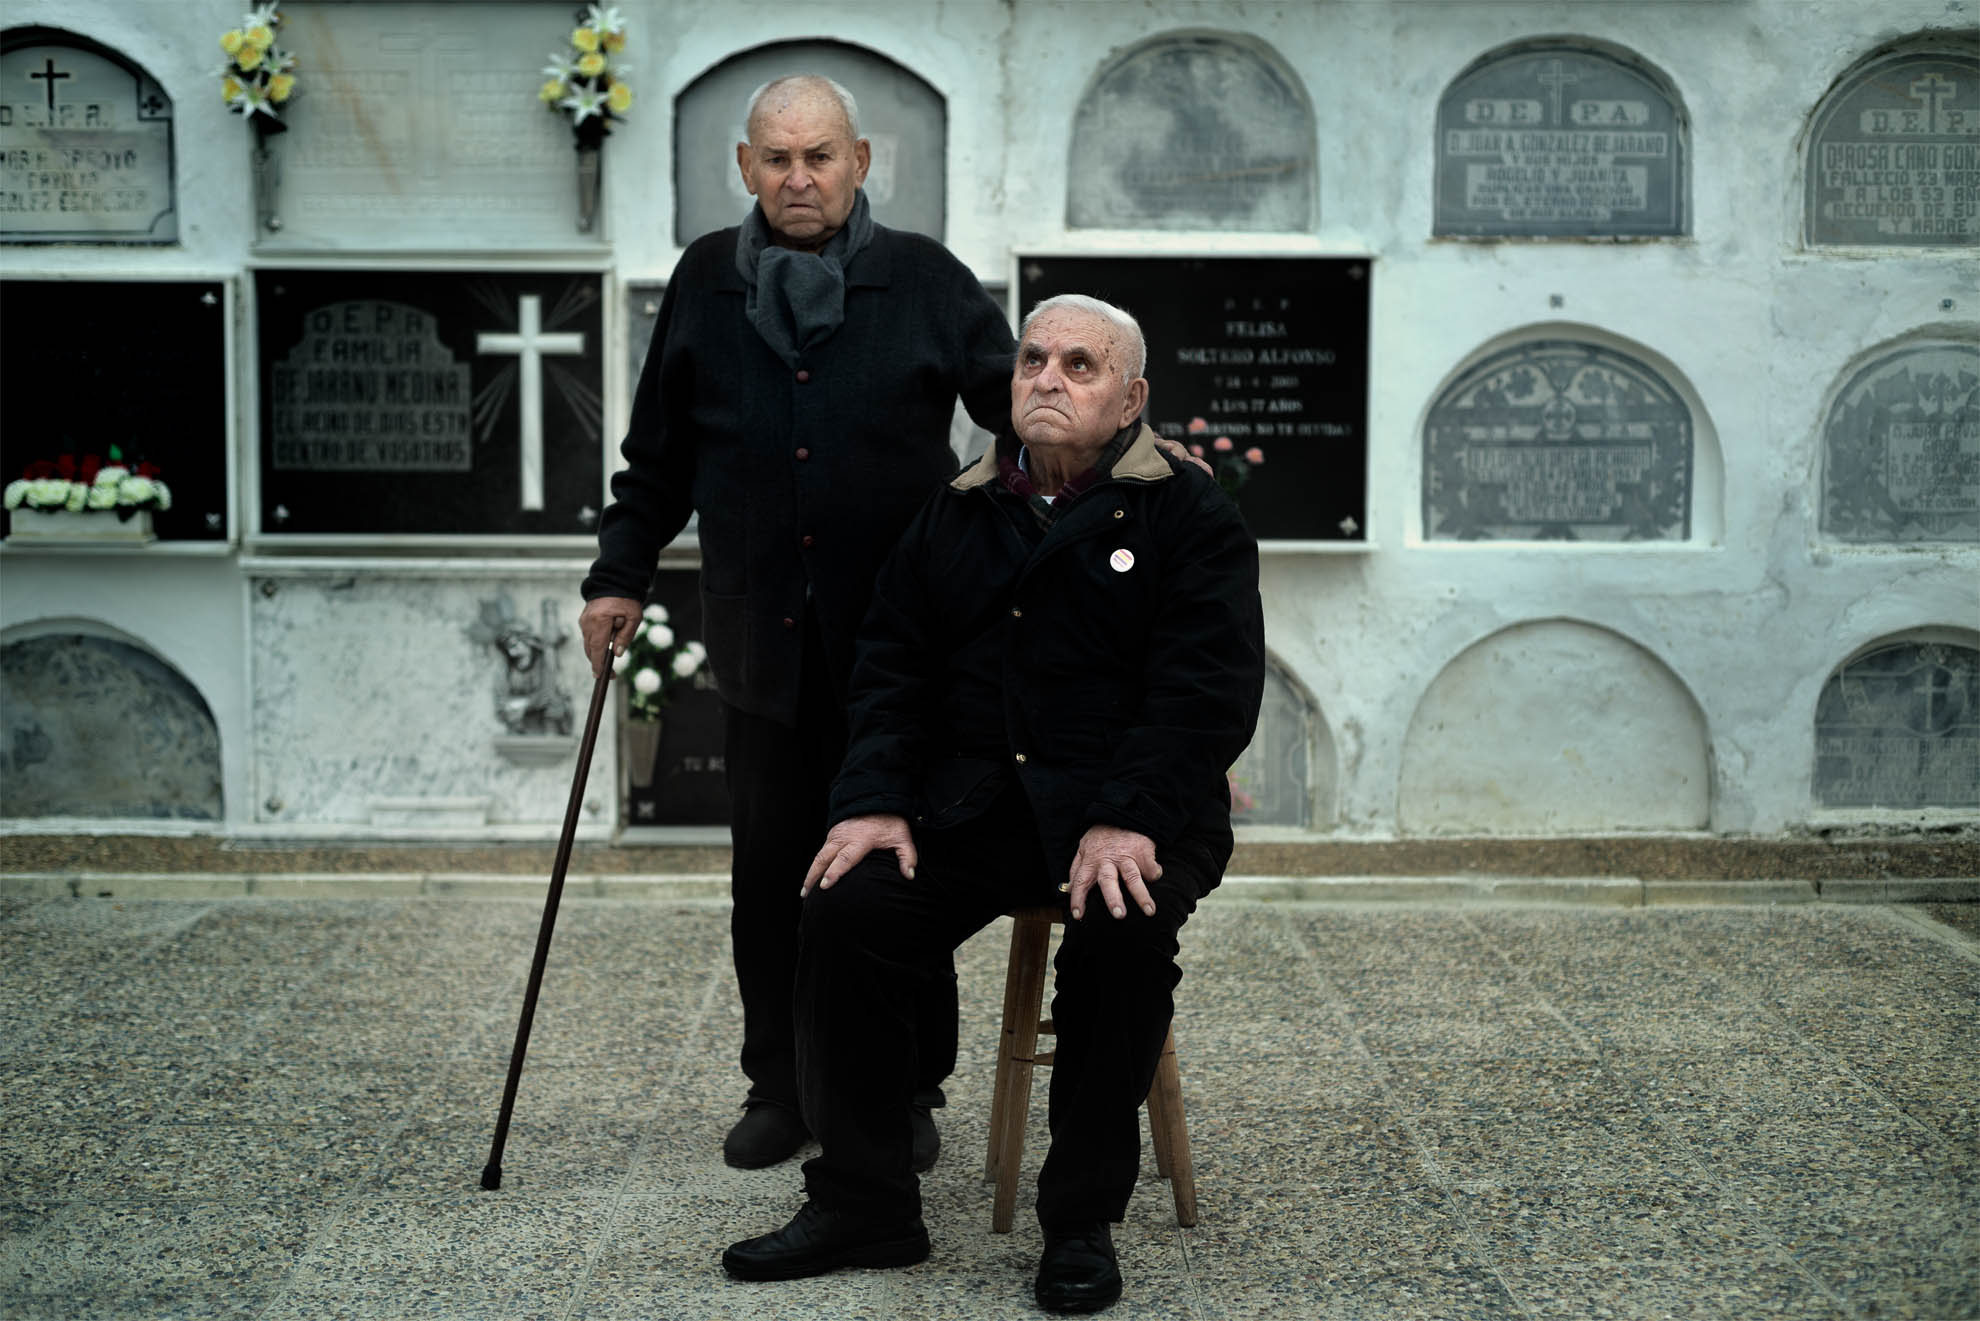 Brothers Juan and Manuel Rodríguez Castilla, Hinojos Cemetery, 2021. In this precise location, next to the current chapel of Cristo del Perdón, is the grave where their father is buried. His mother was asked to sign a document reporting her husband as missing or dead in the war, but she did not sign, and therefore could not receive an orphan's pension for her children.